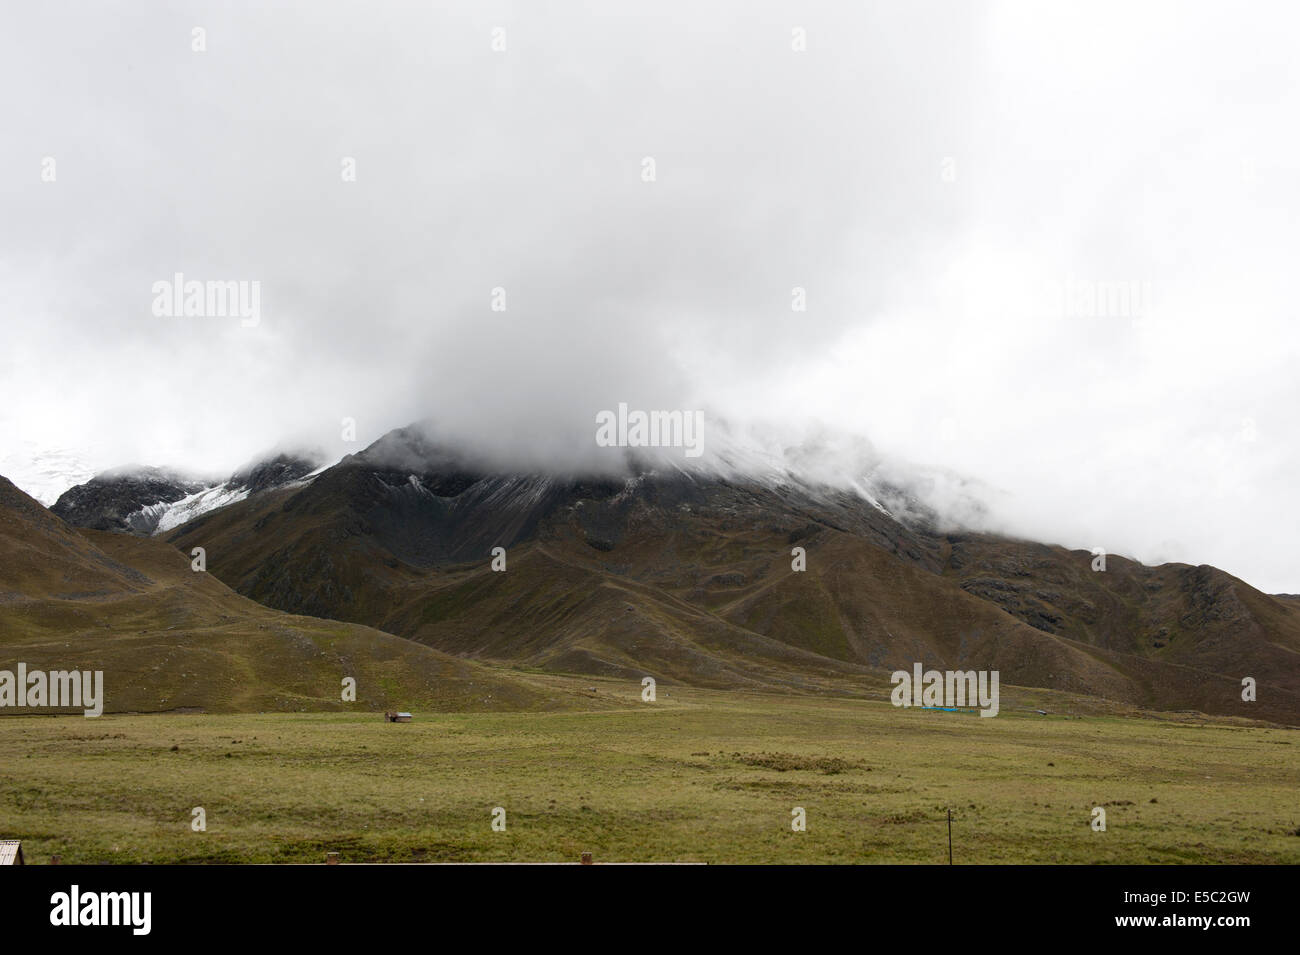 A cloudy mountain view on route 35 in the Melgar Province in Peru. Stock Photo